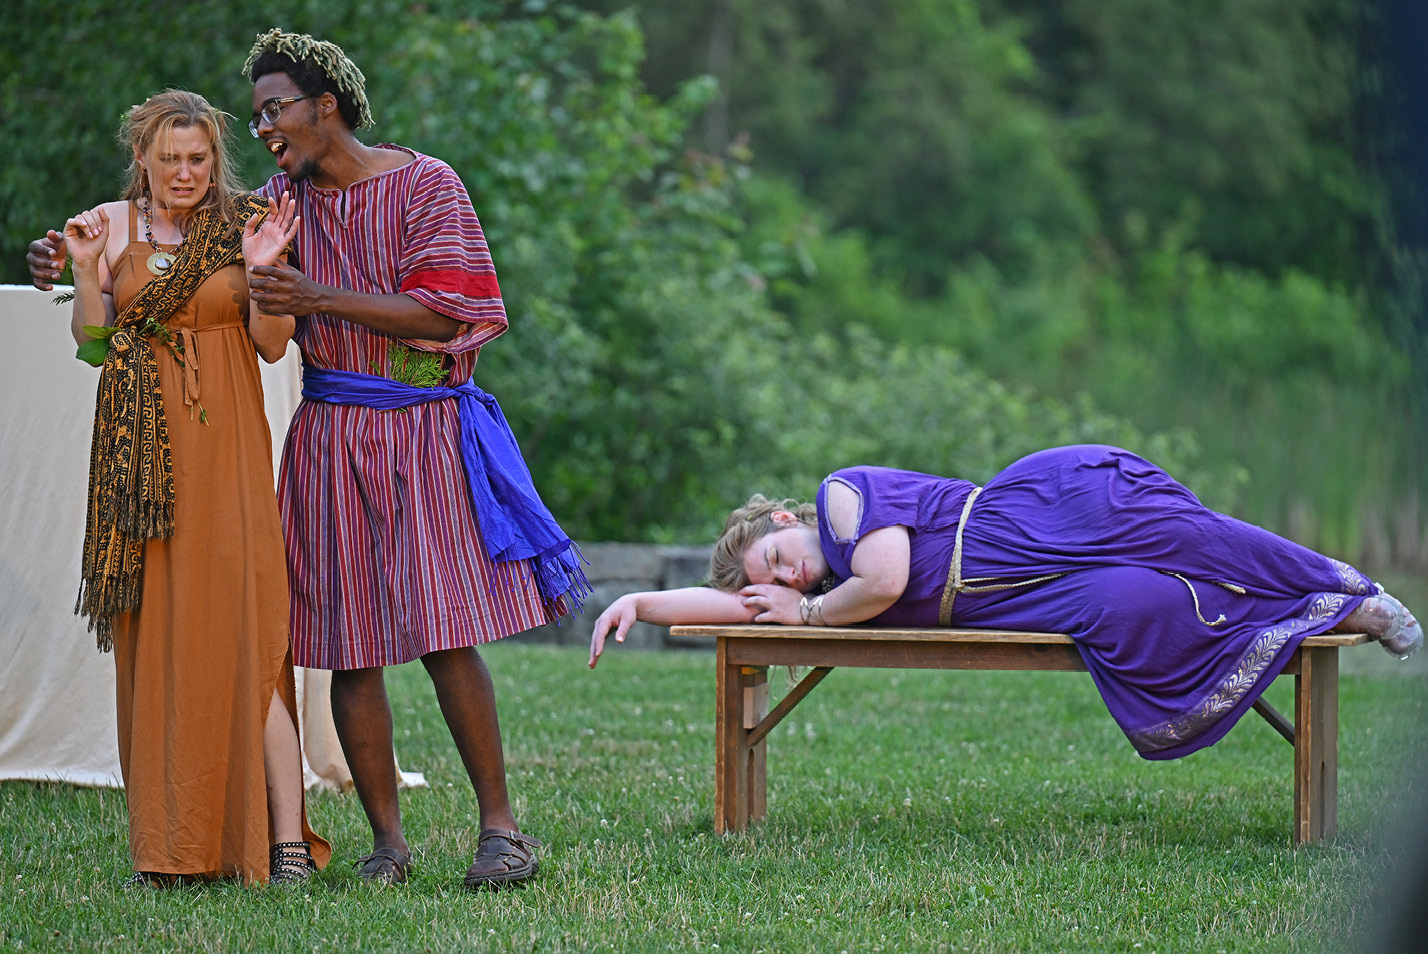 Actors perform during Flock Theater's Shakespeare in the Park in the Arboretum